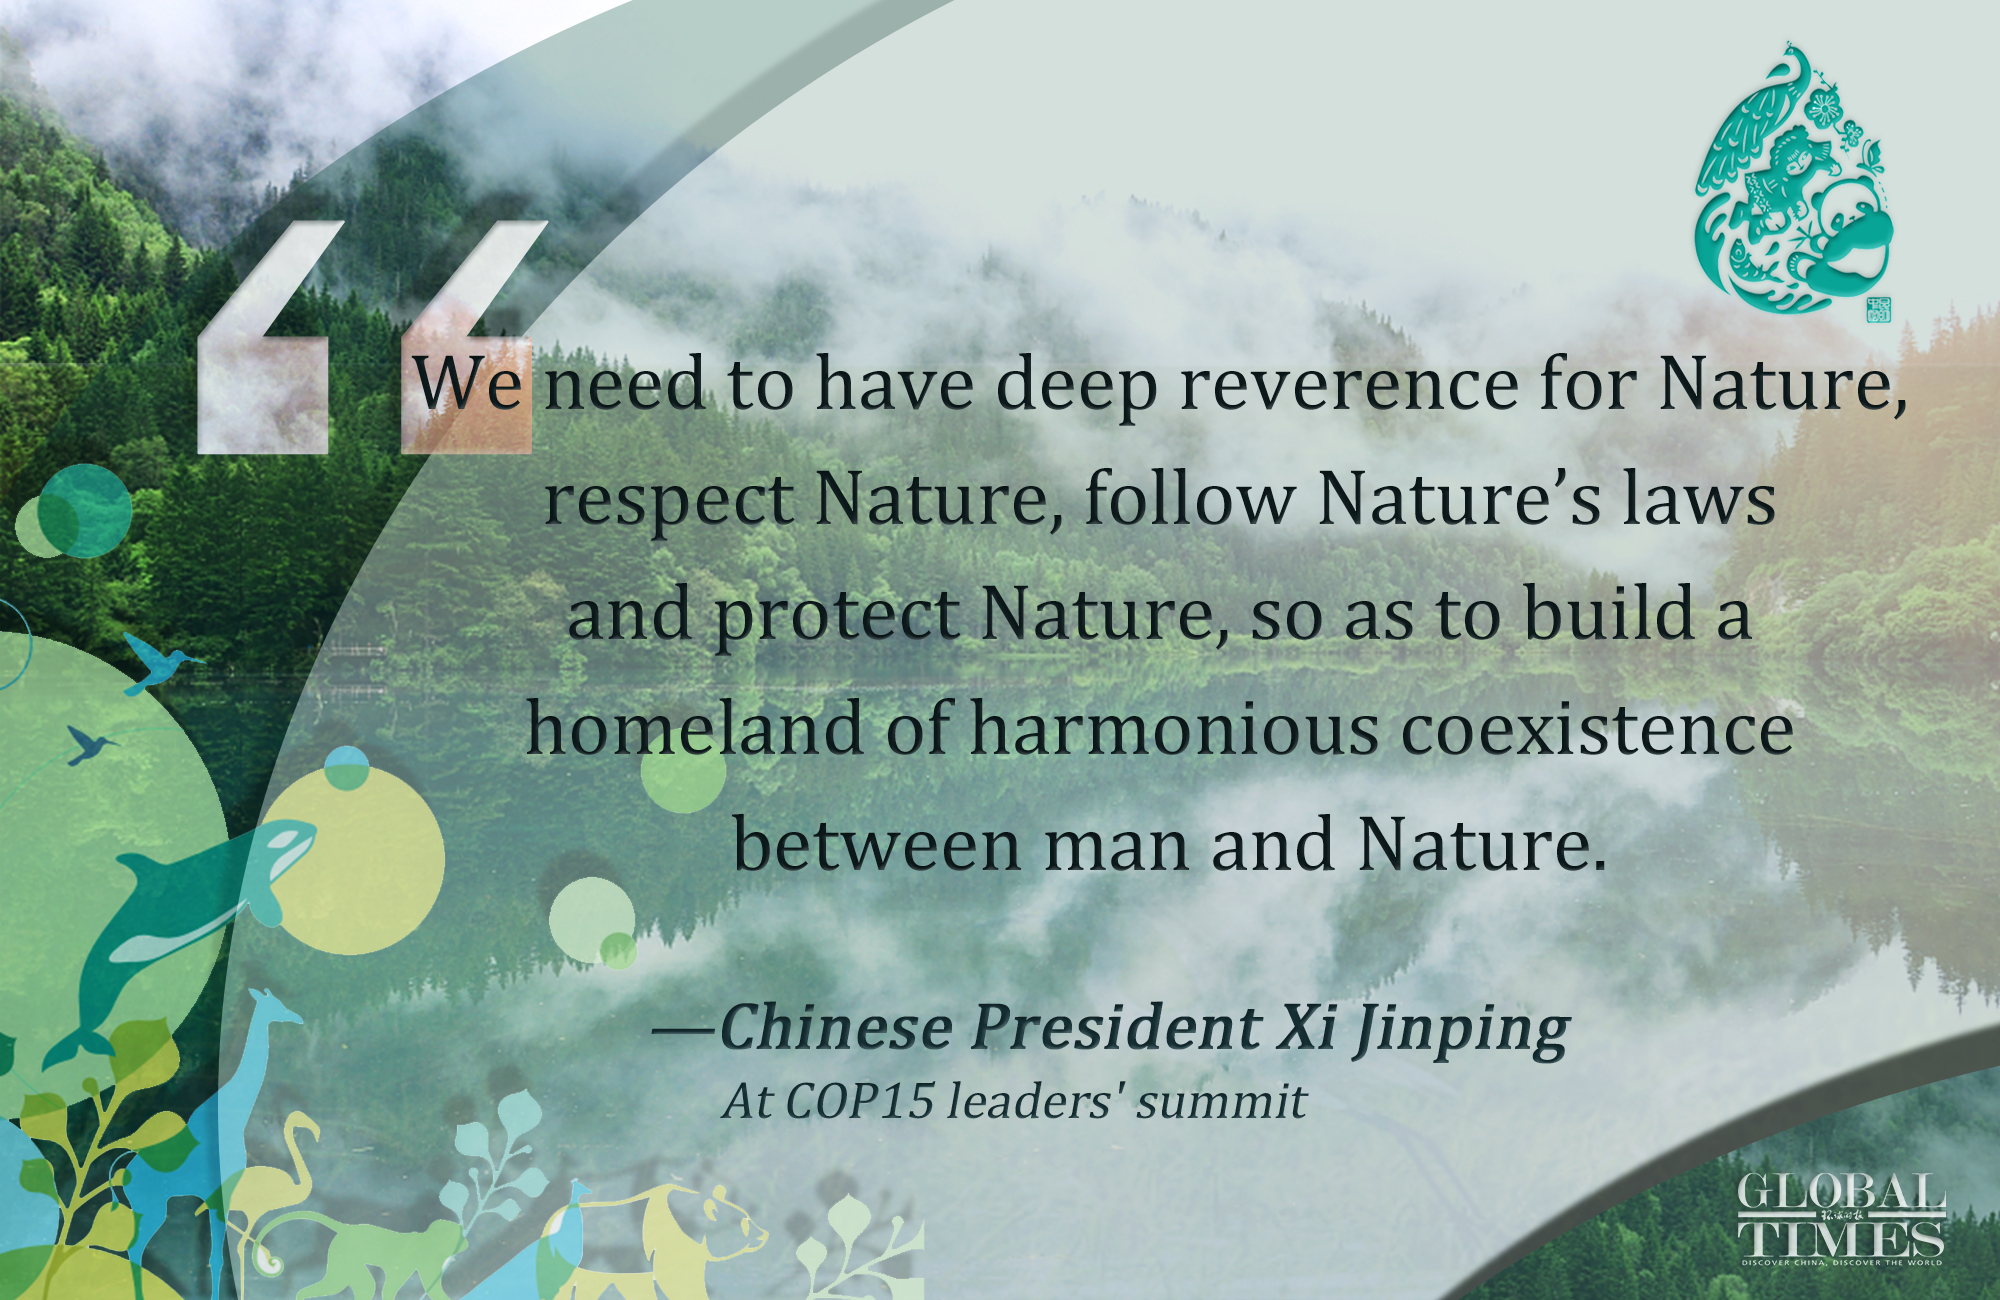 Highlights of Xi' speech at COP15 leaders' summit Graphic: Yu Tianjiao/GT